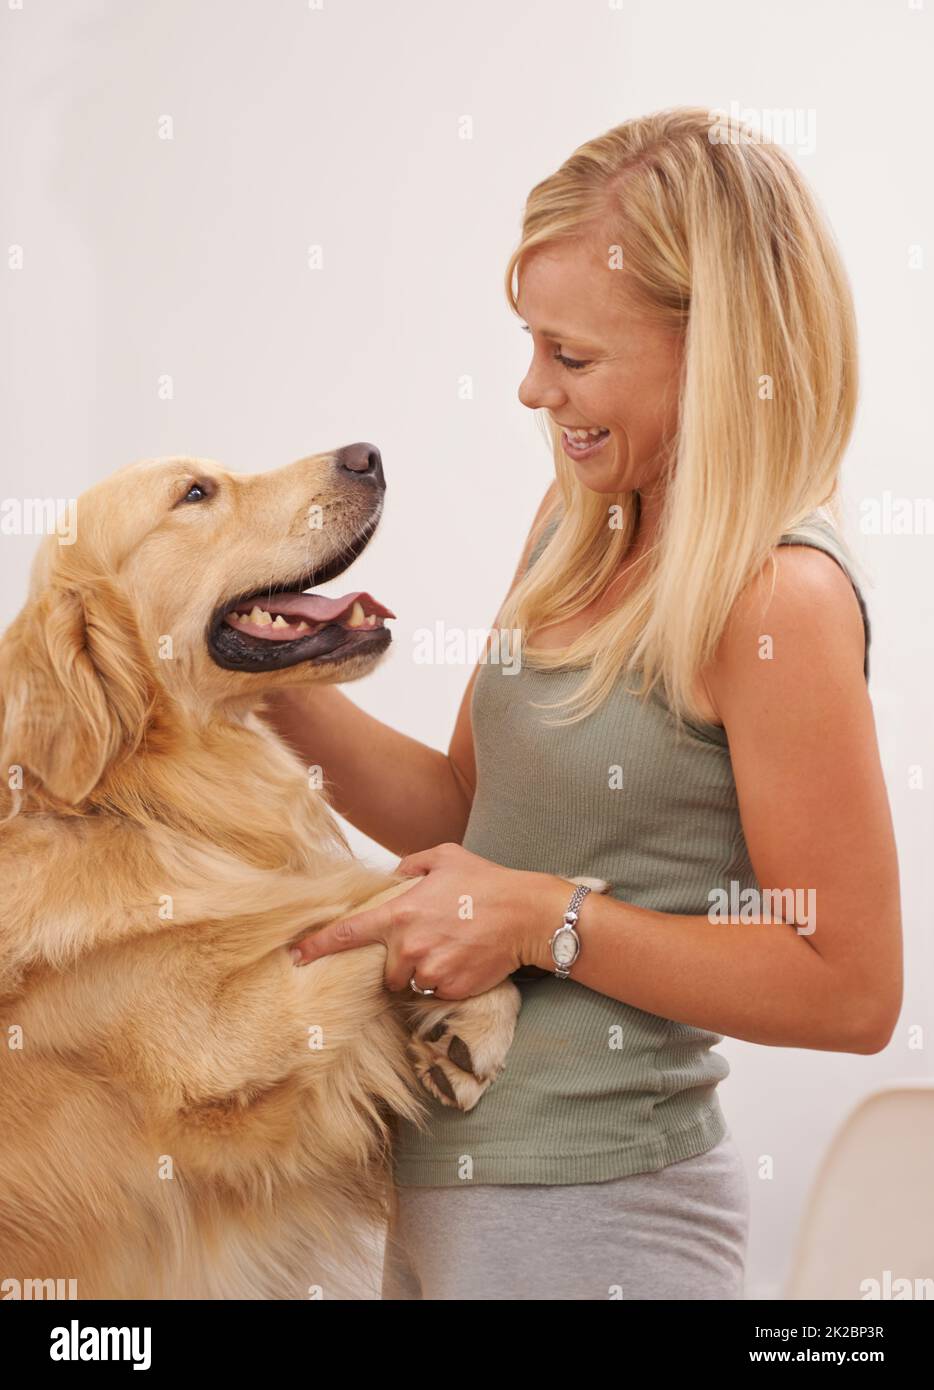 Welcome home - Ive missed you. Shot of an attractive young woman interacting with her dog. Stock Photo